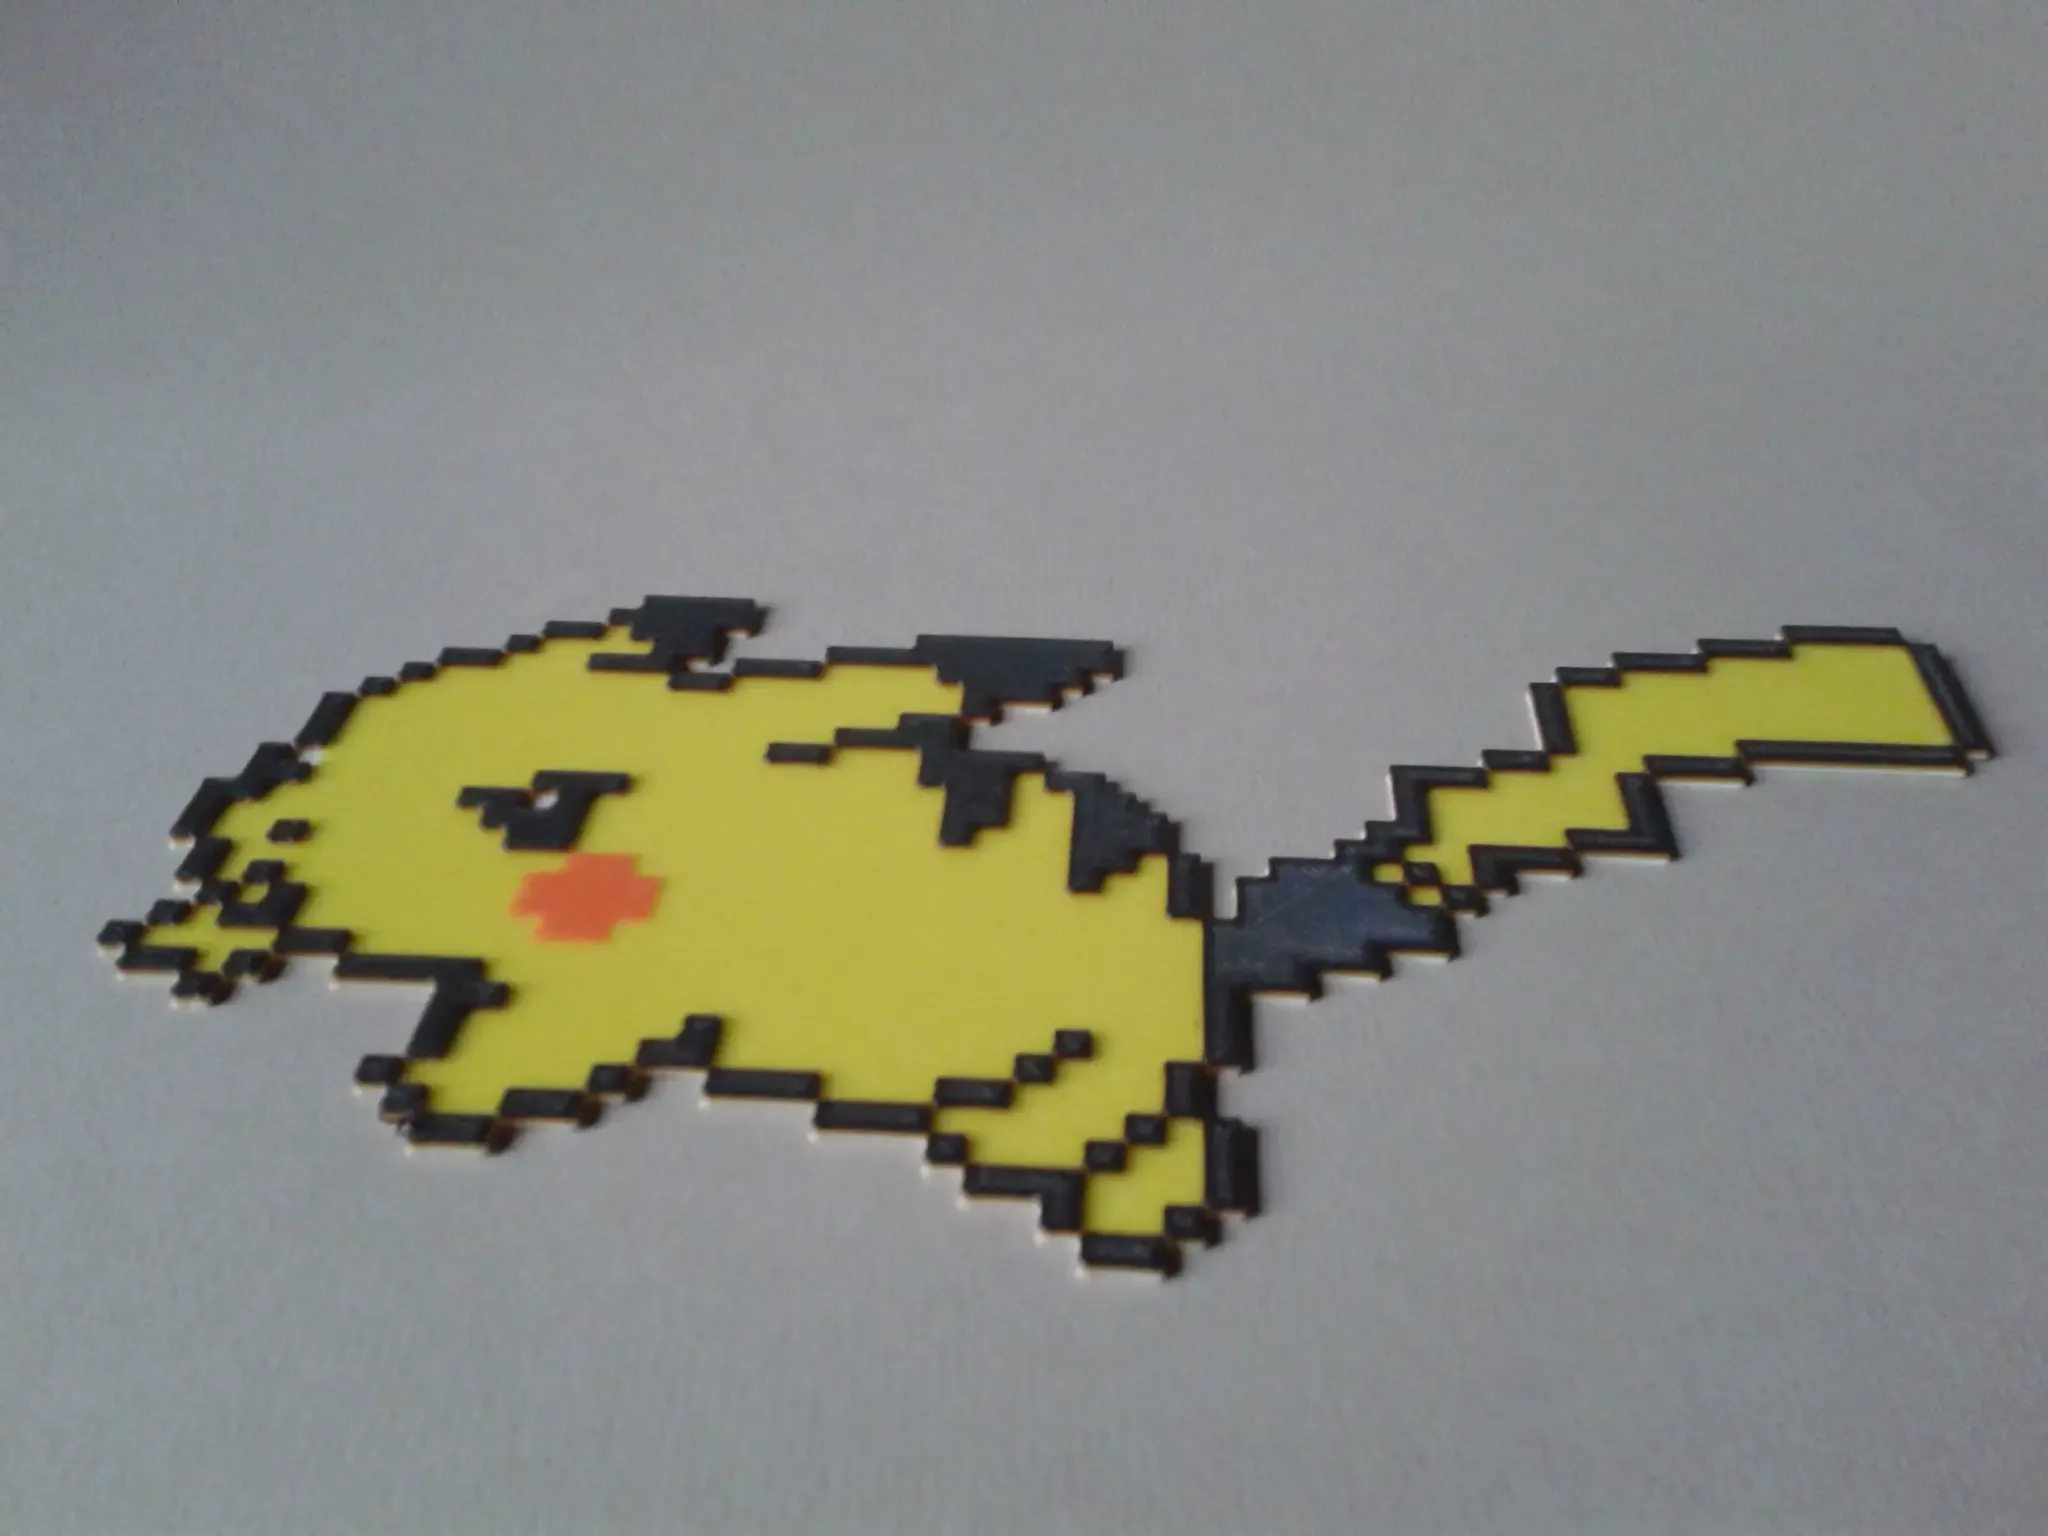 Pikachu, with 3 filament changes